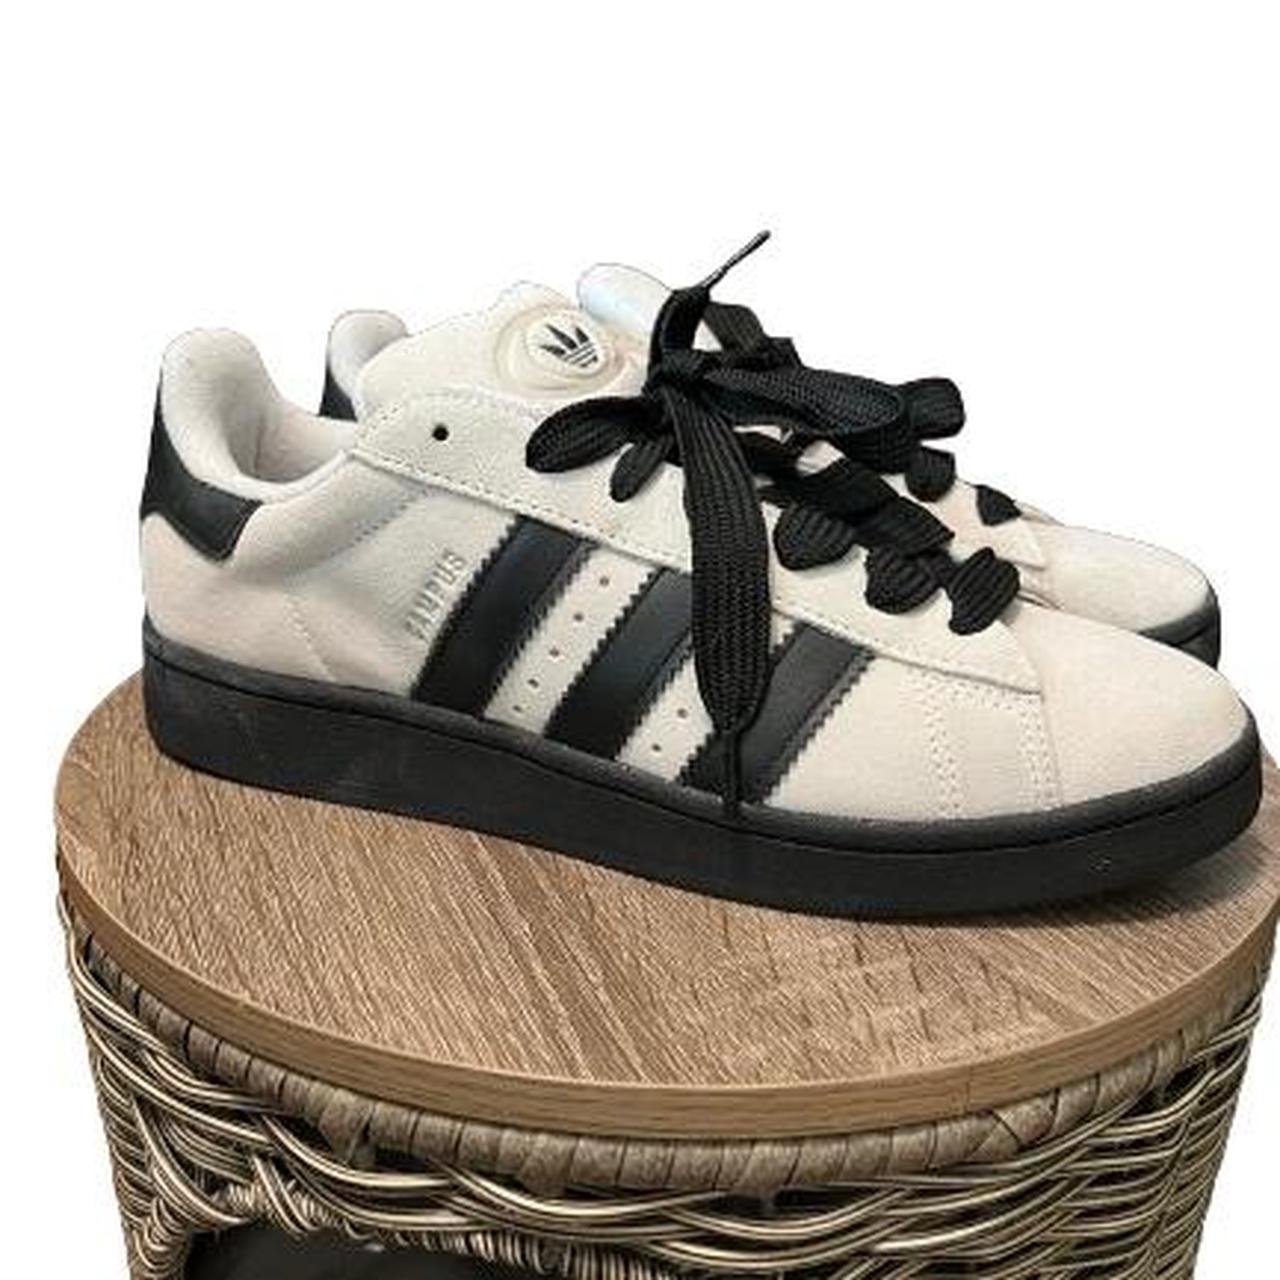 Adidas campus 00 off white and black colorway SIZE... - Depop